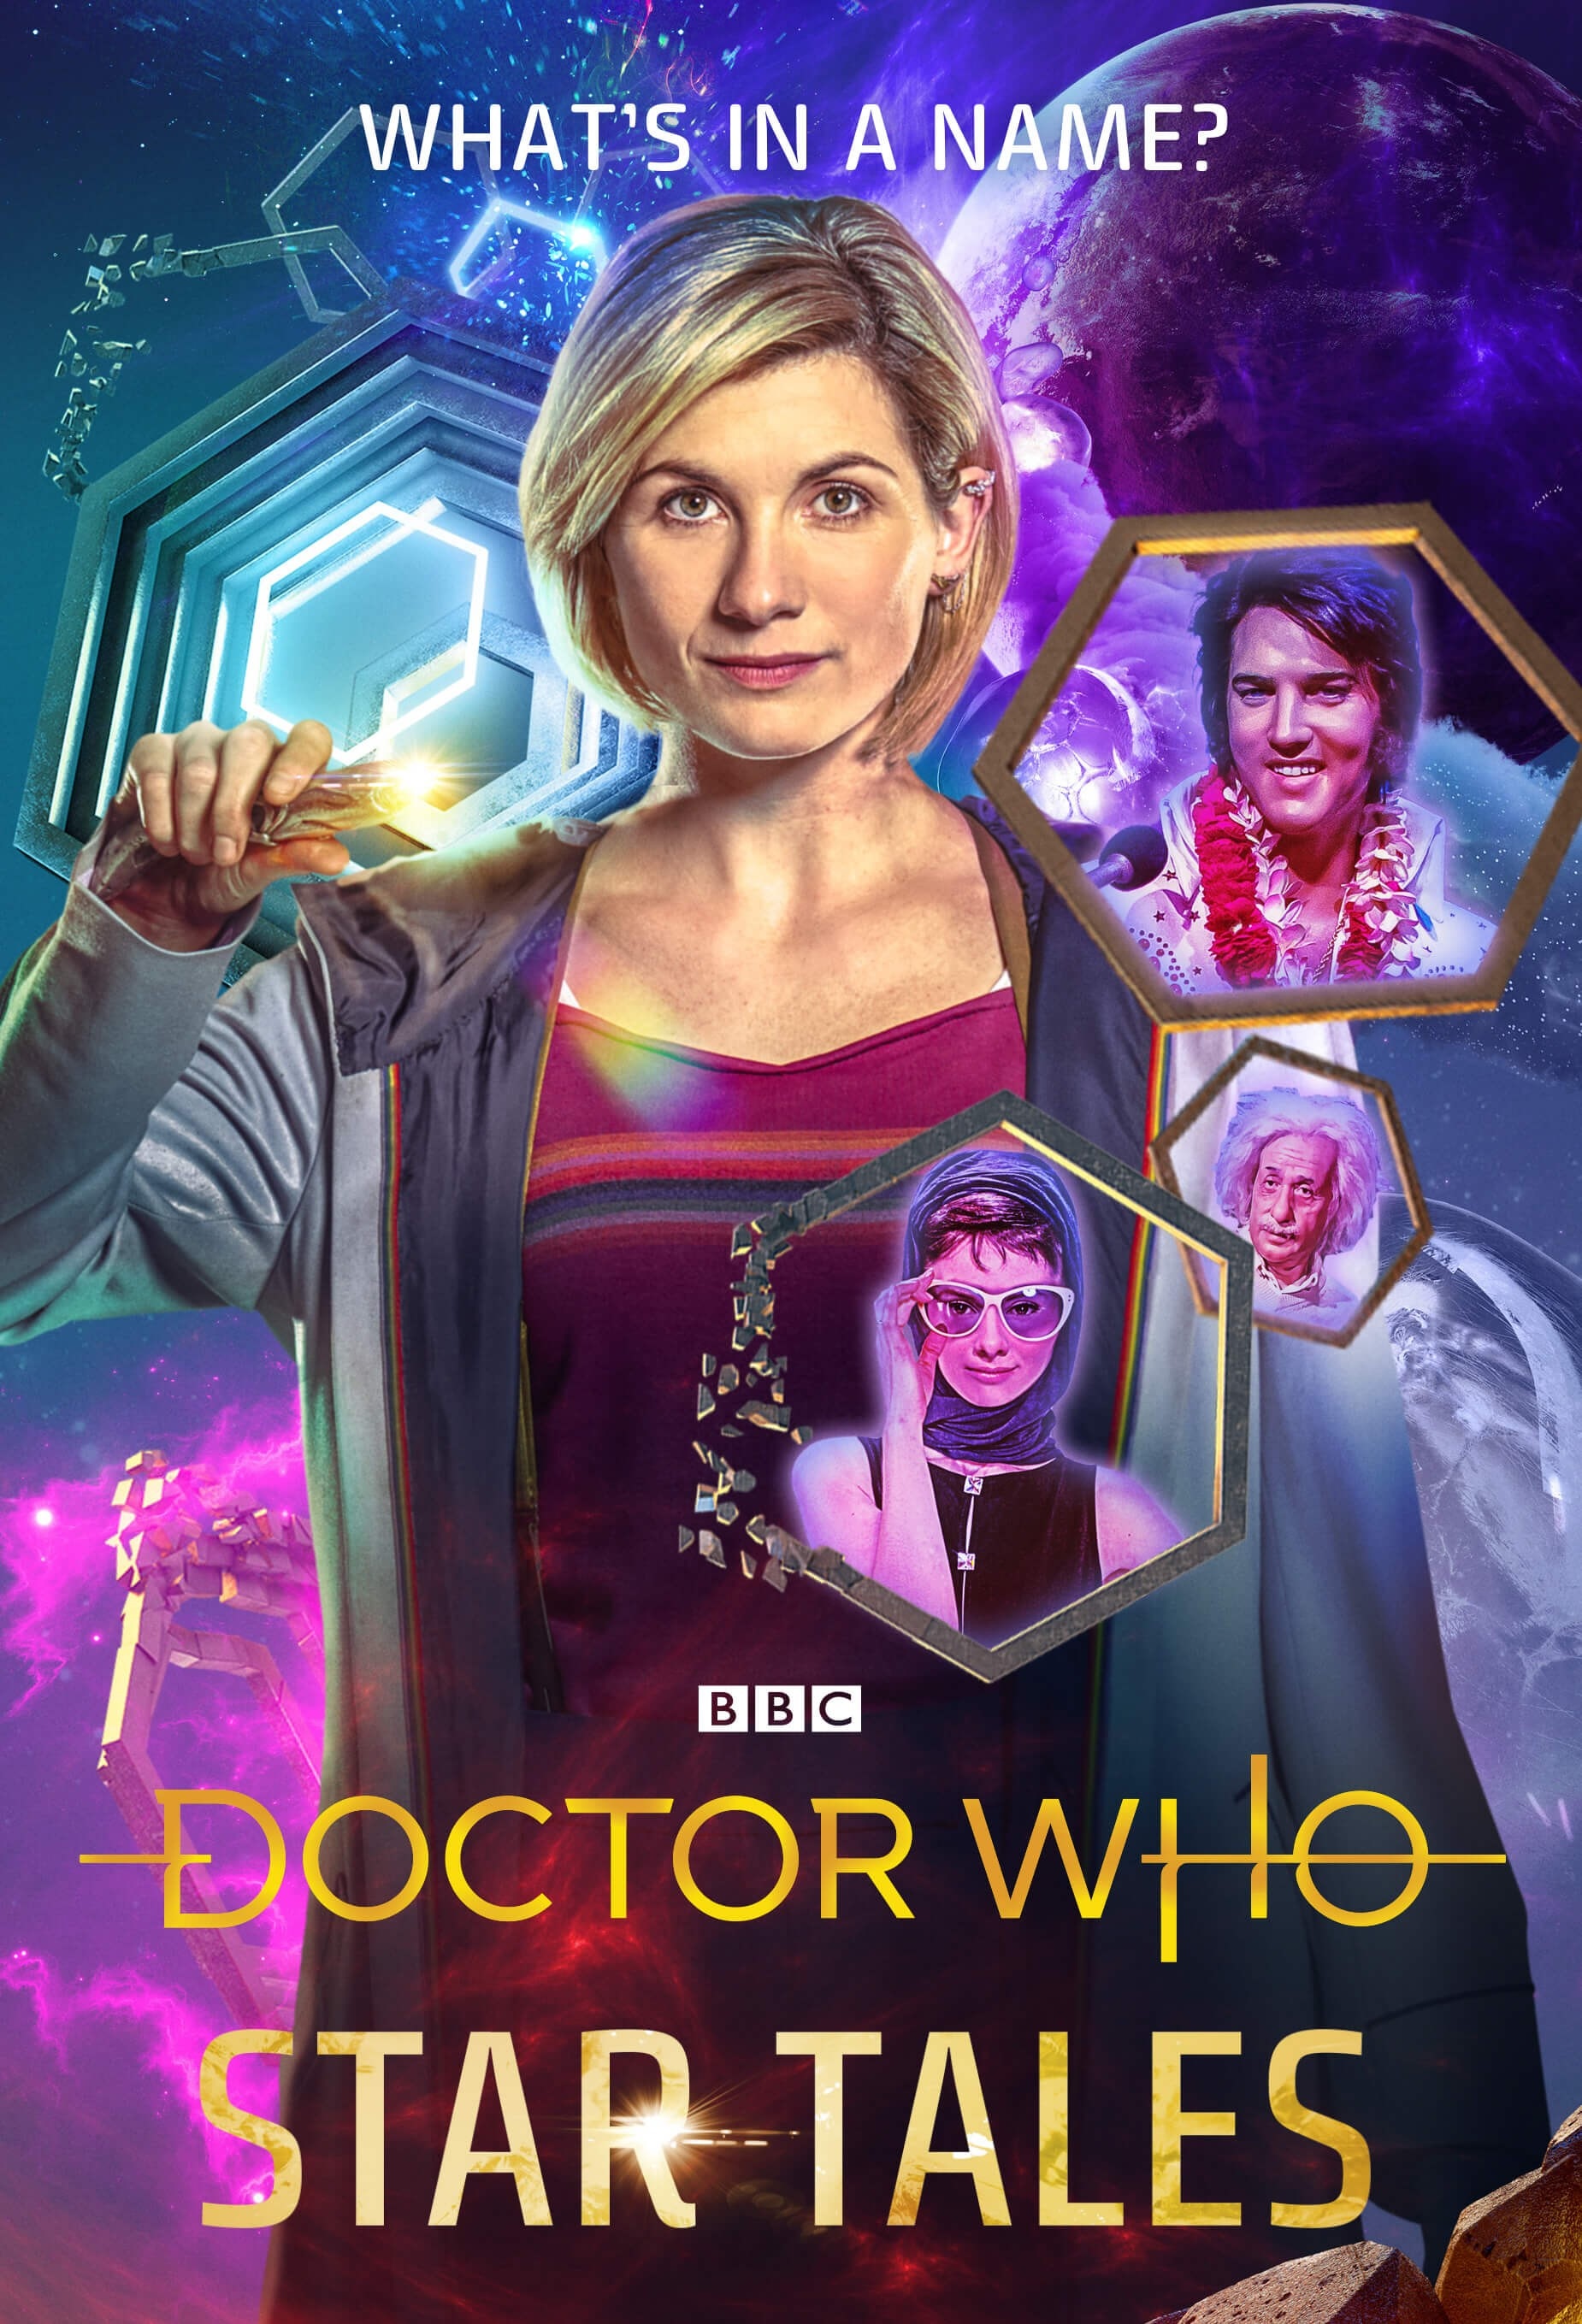 NEW British BBC Humor POSTER We're All Stories In The End Doctor Who TARDIS